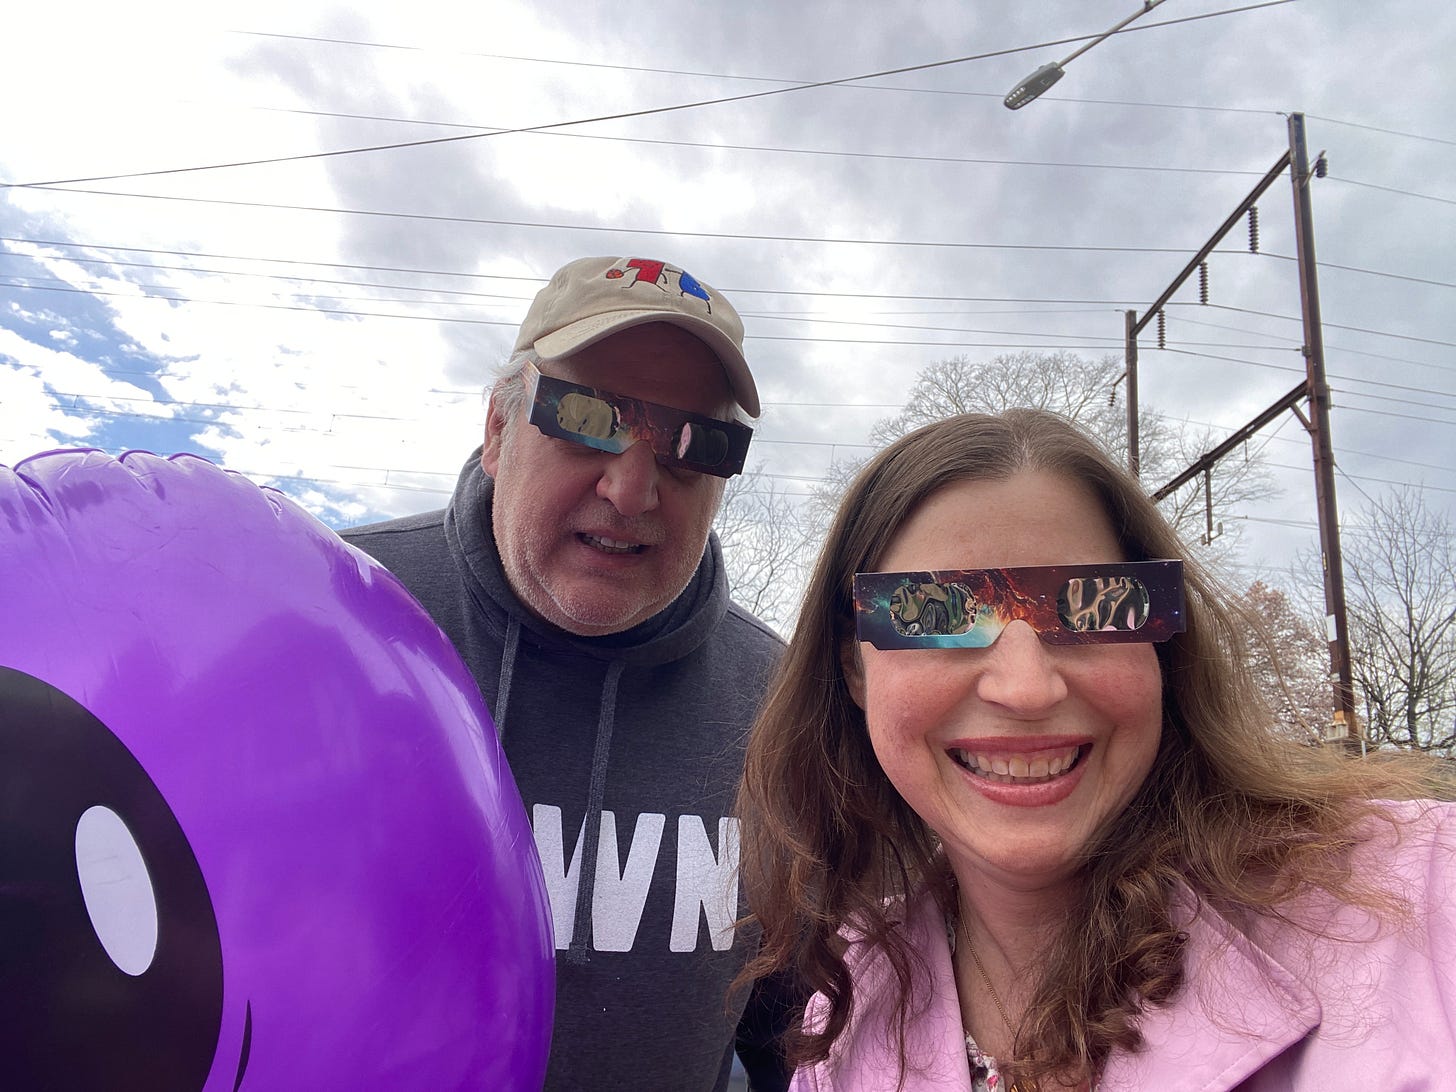 Fred and Gabrielle wear sclipse glasses and smile at the camera. Behind them  is a cloudy, overcast sky.